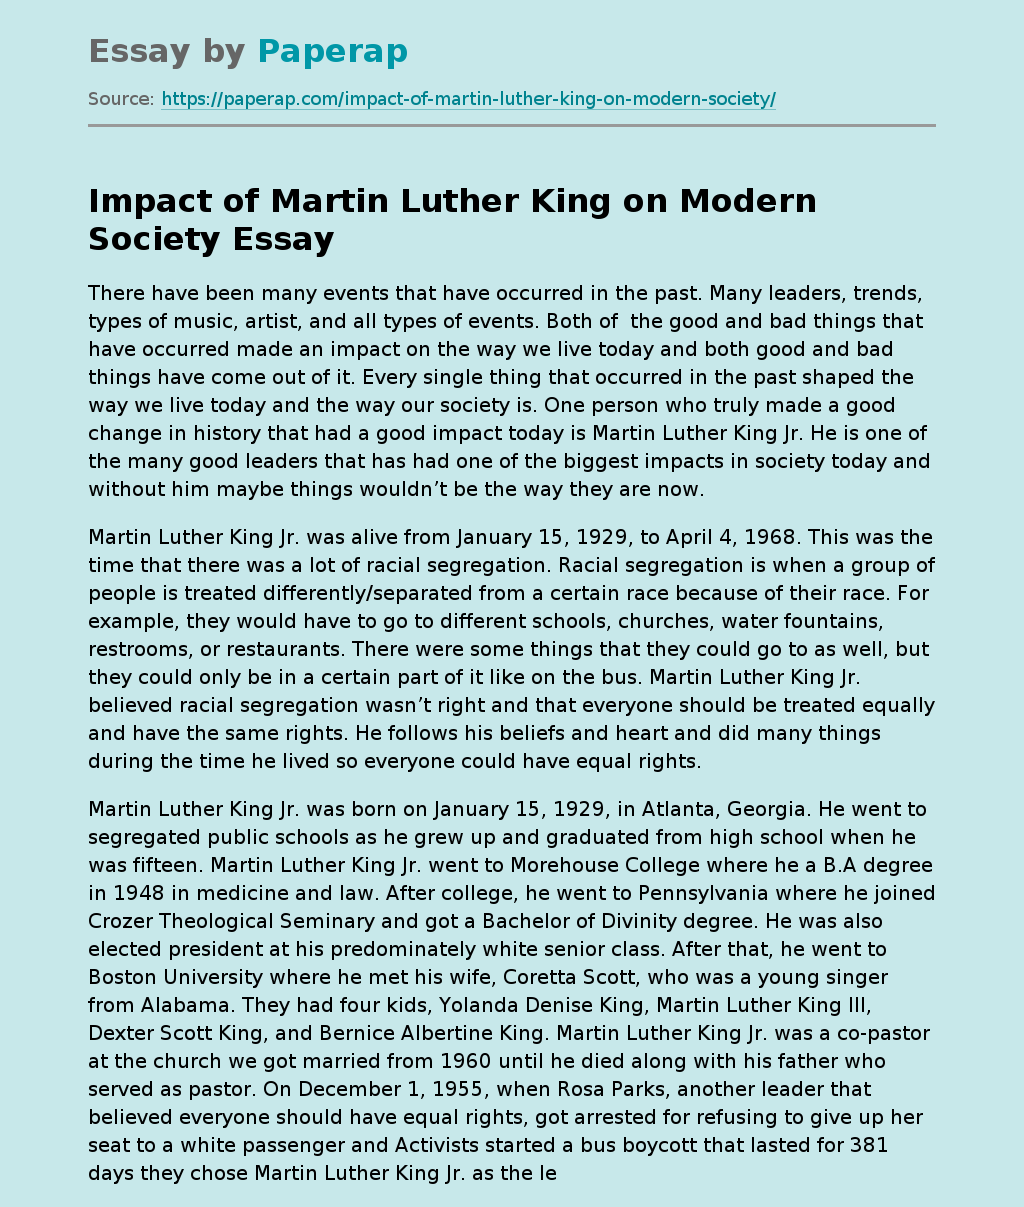 Impact of Martin Luther King on Modern Society